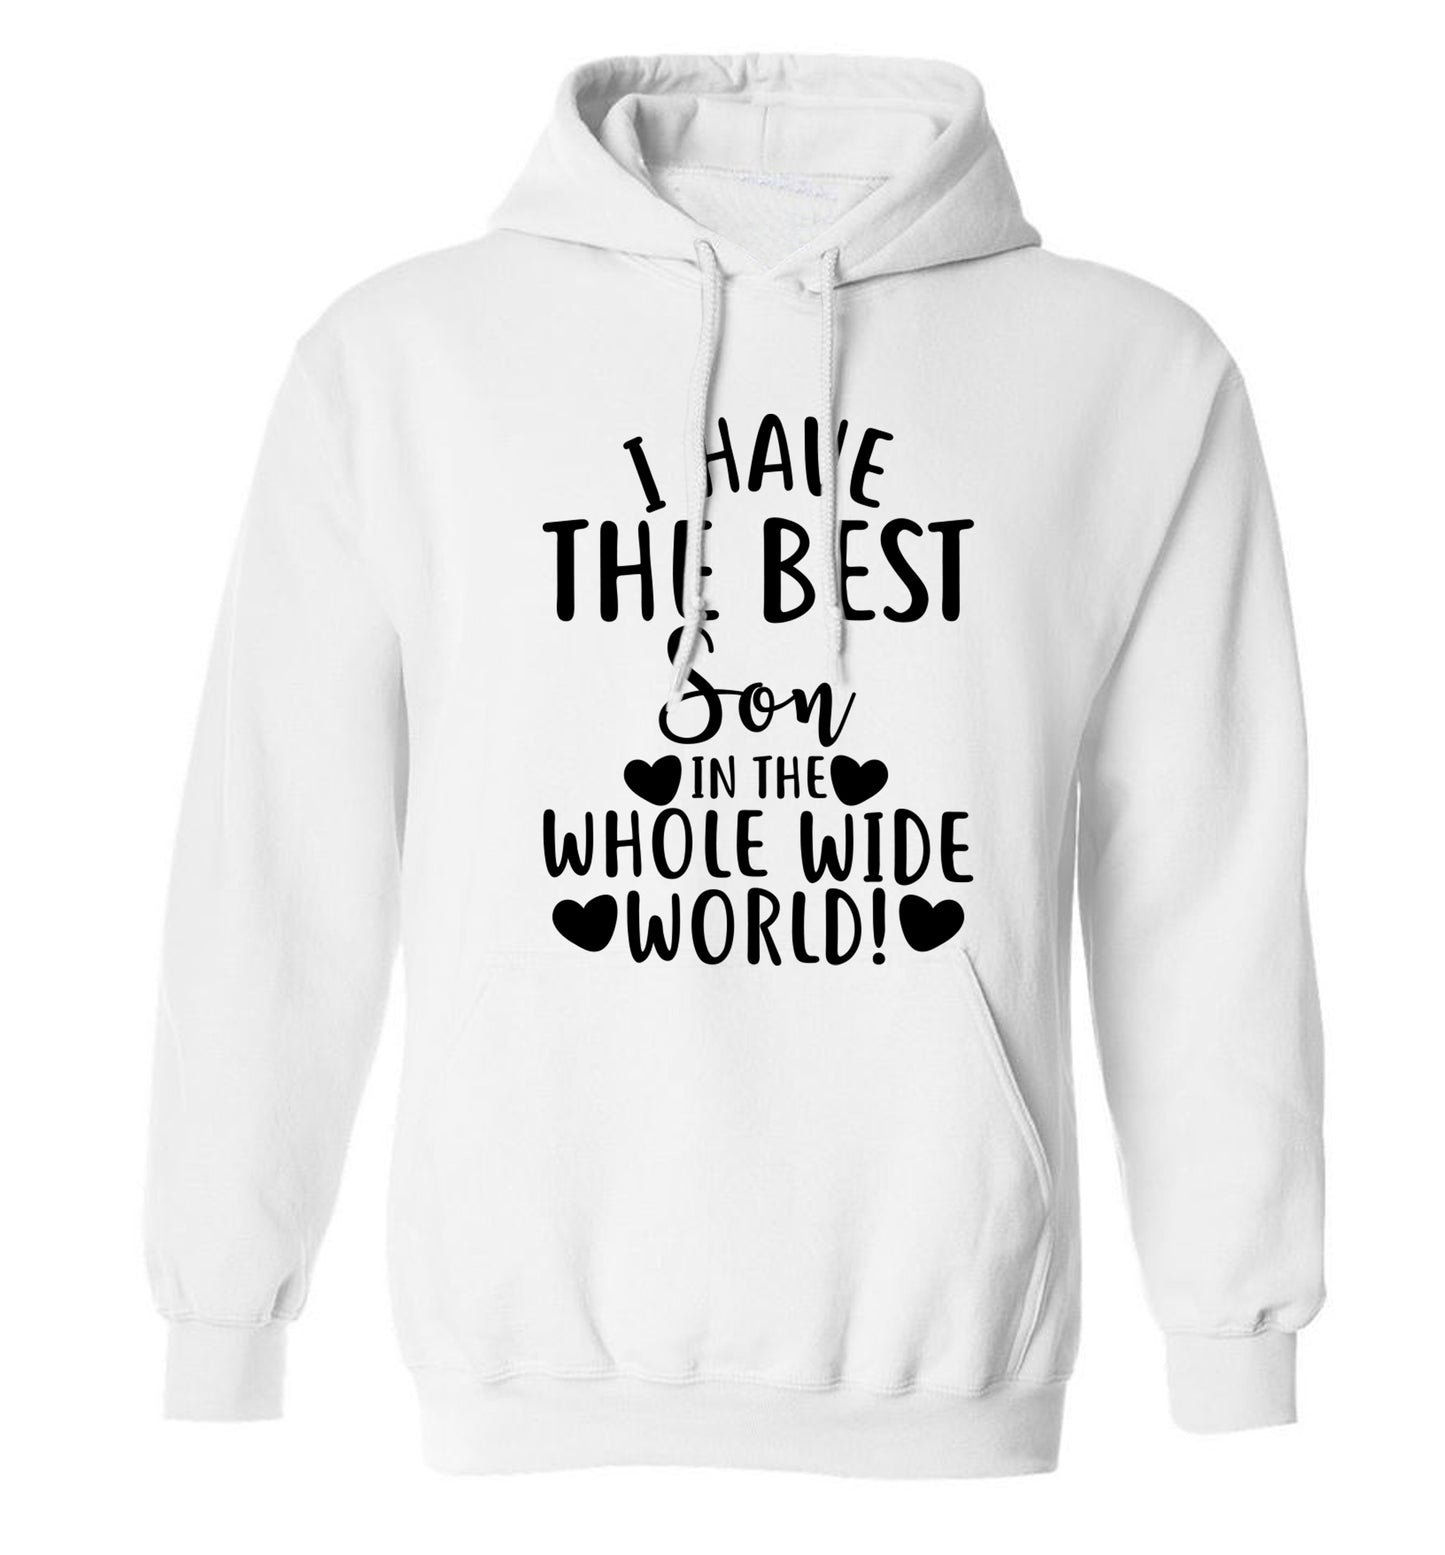 I have the best son in the whole wide world! adults unisex white hoodie 2XL